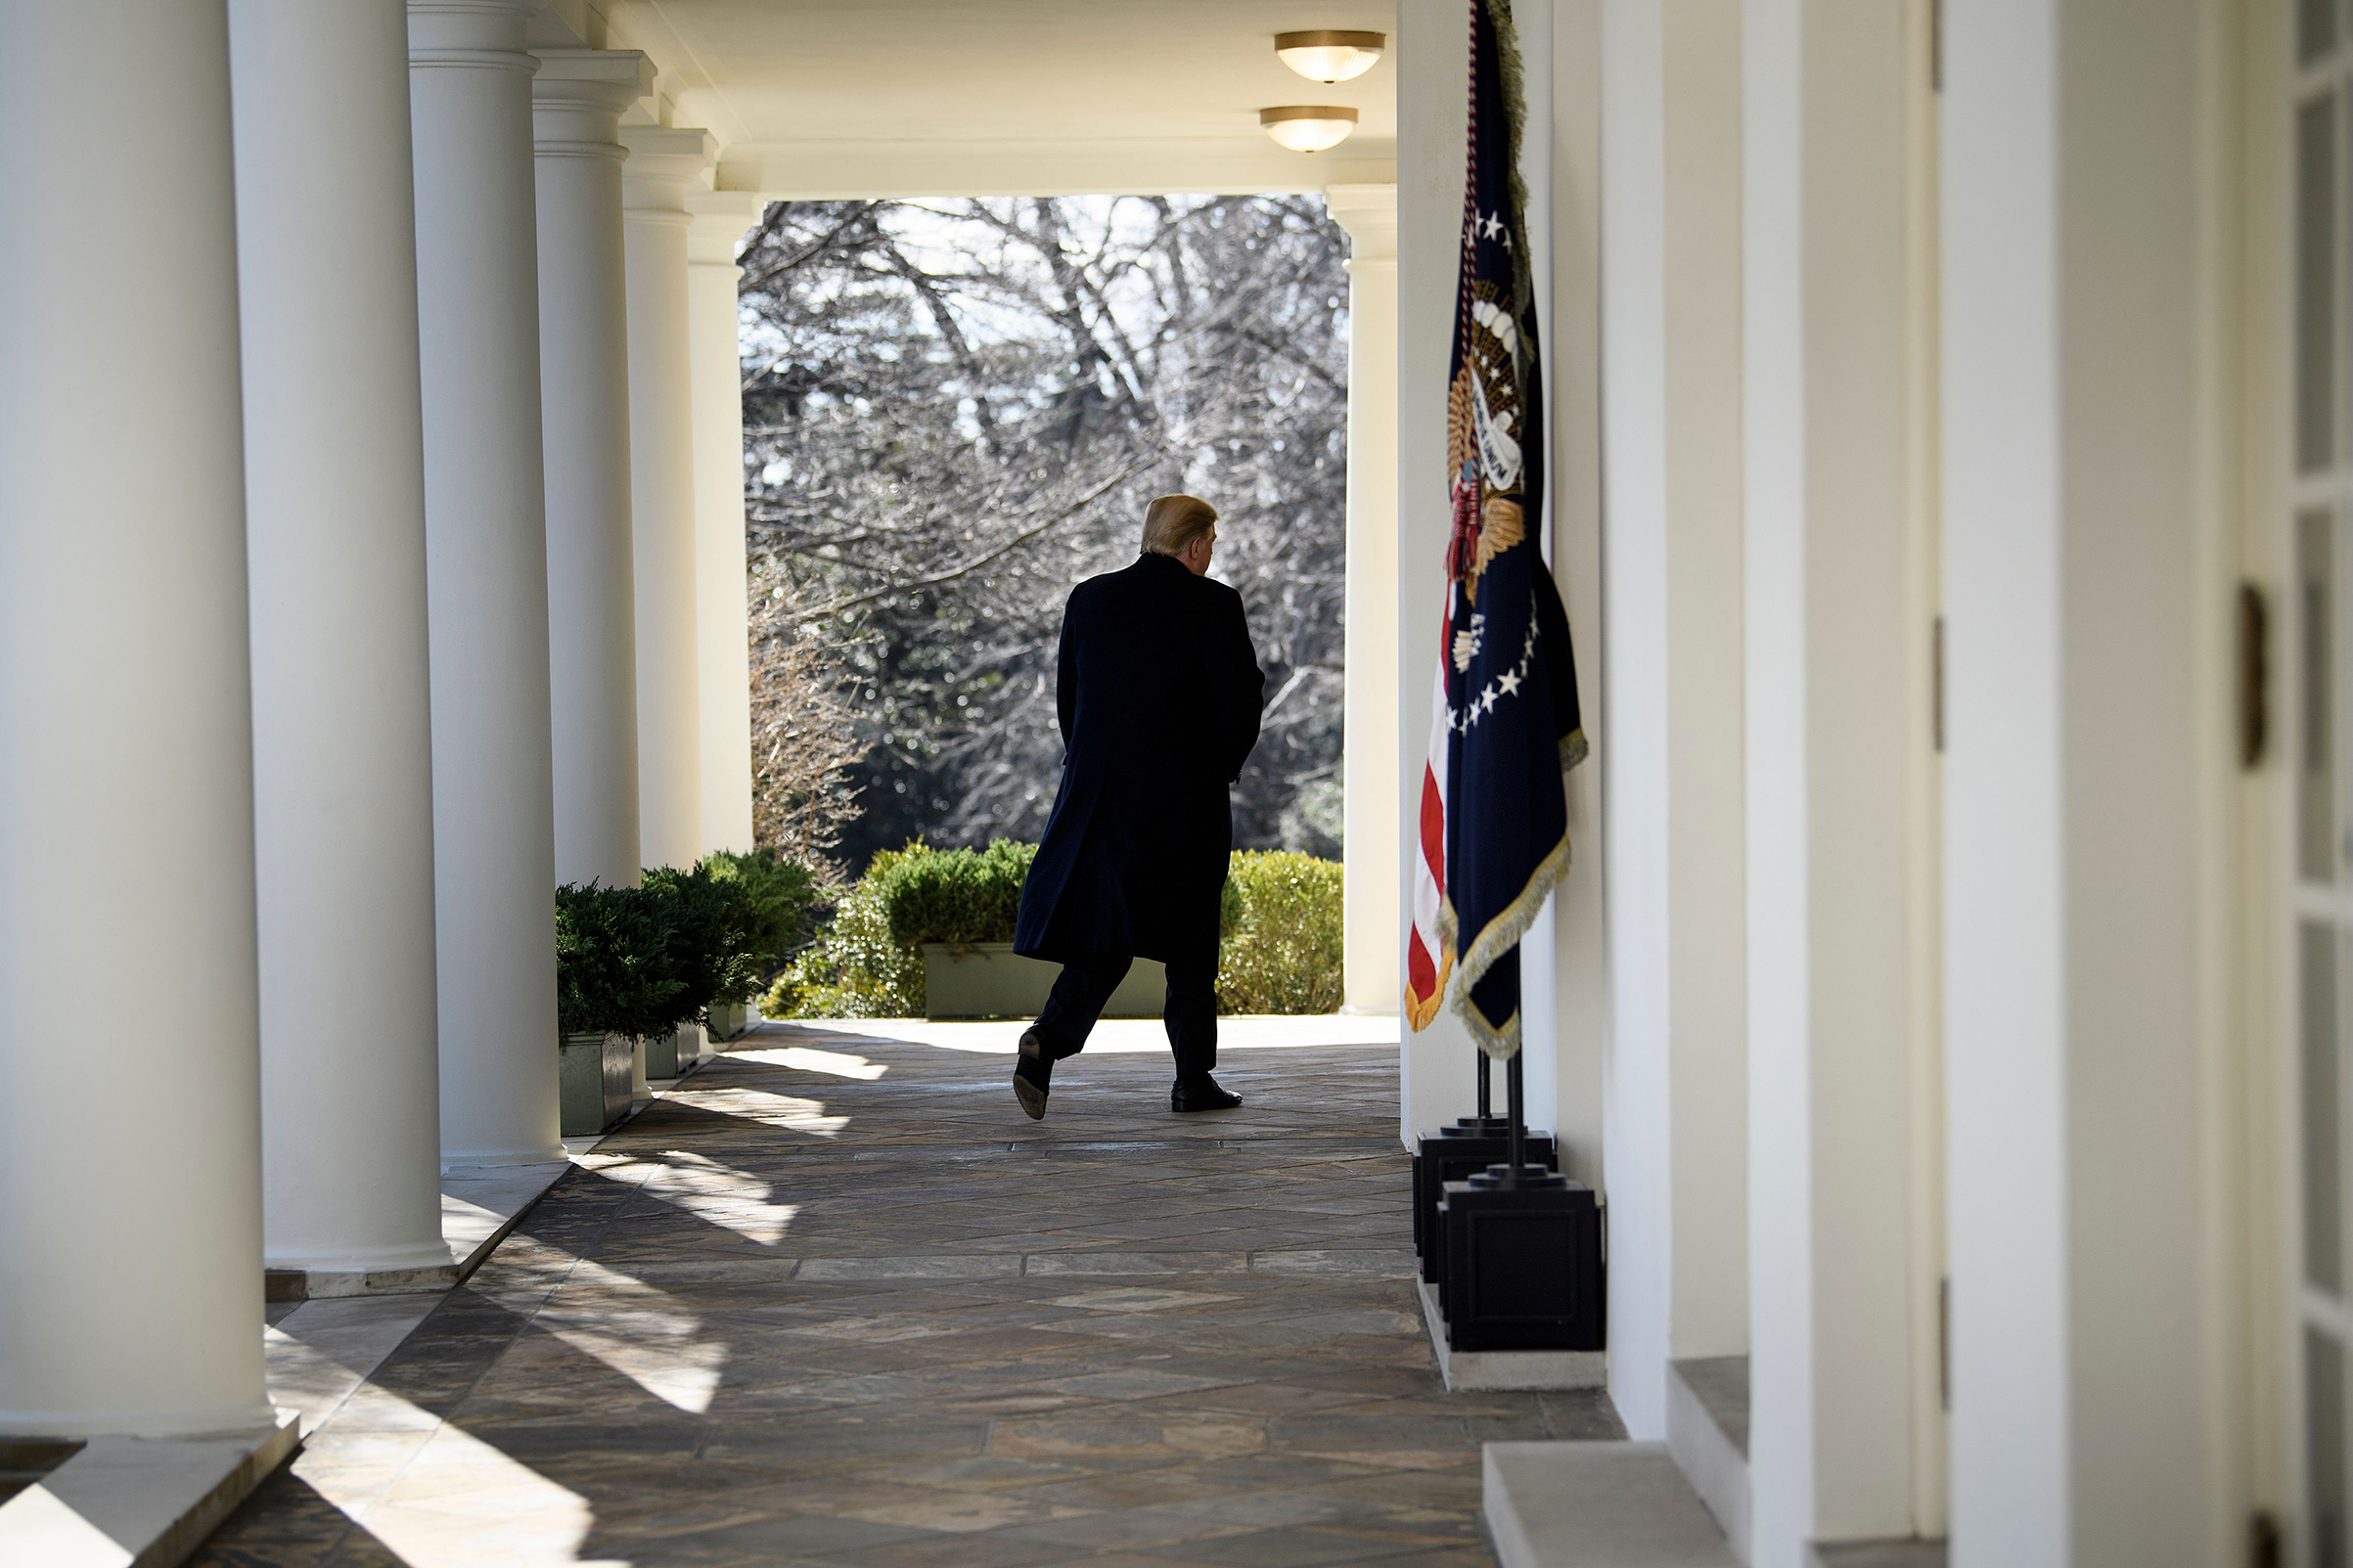 President Donald Trump leaves after speaking from the Rose Garden of the White House in Washington, on Feb. 15, 2019. (Brendan Smialowski—AFP/Getty Images)